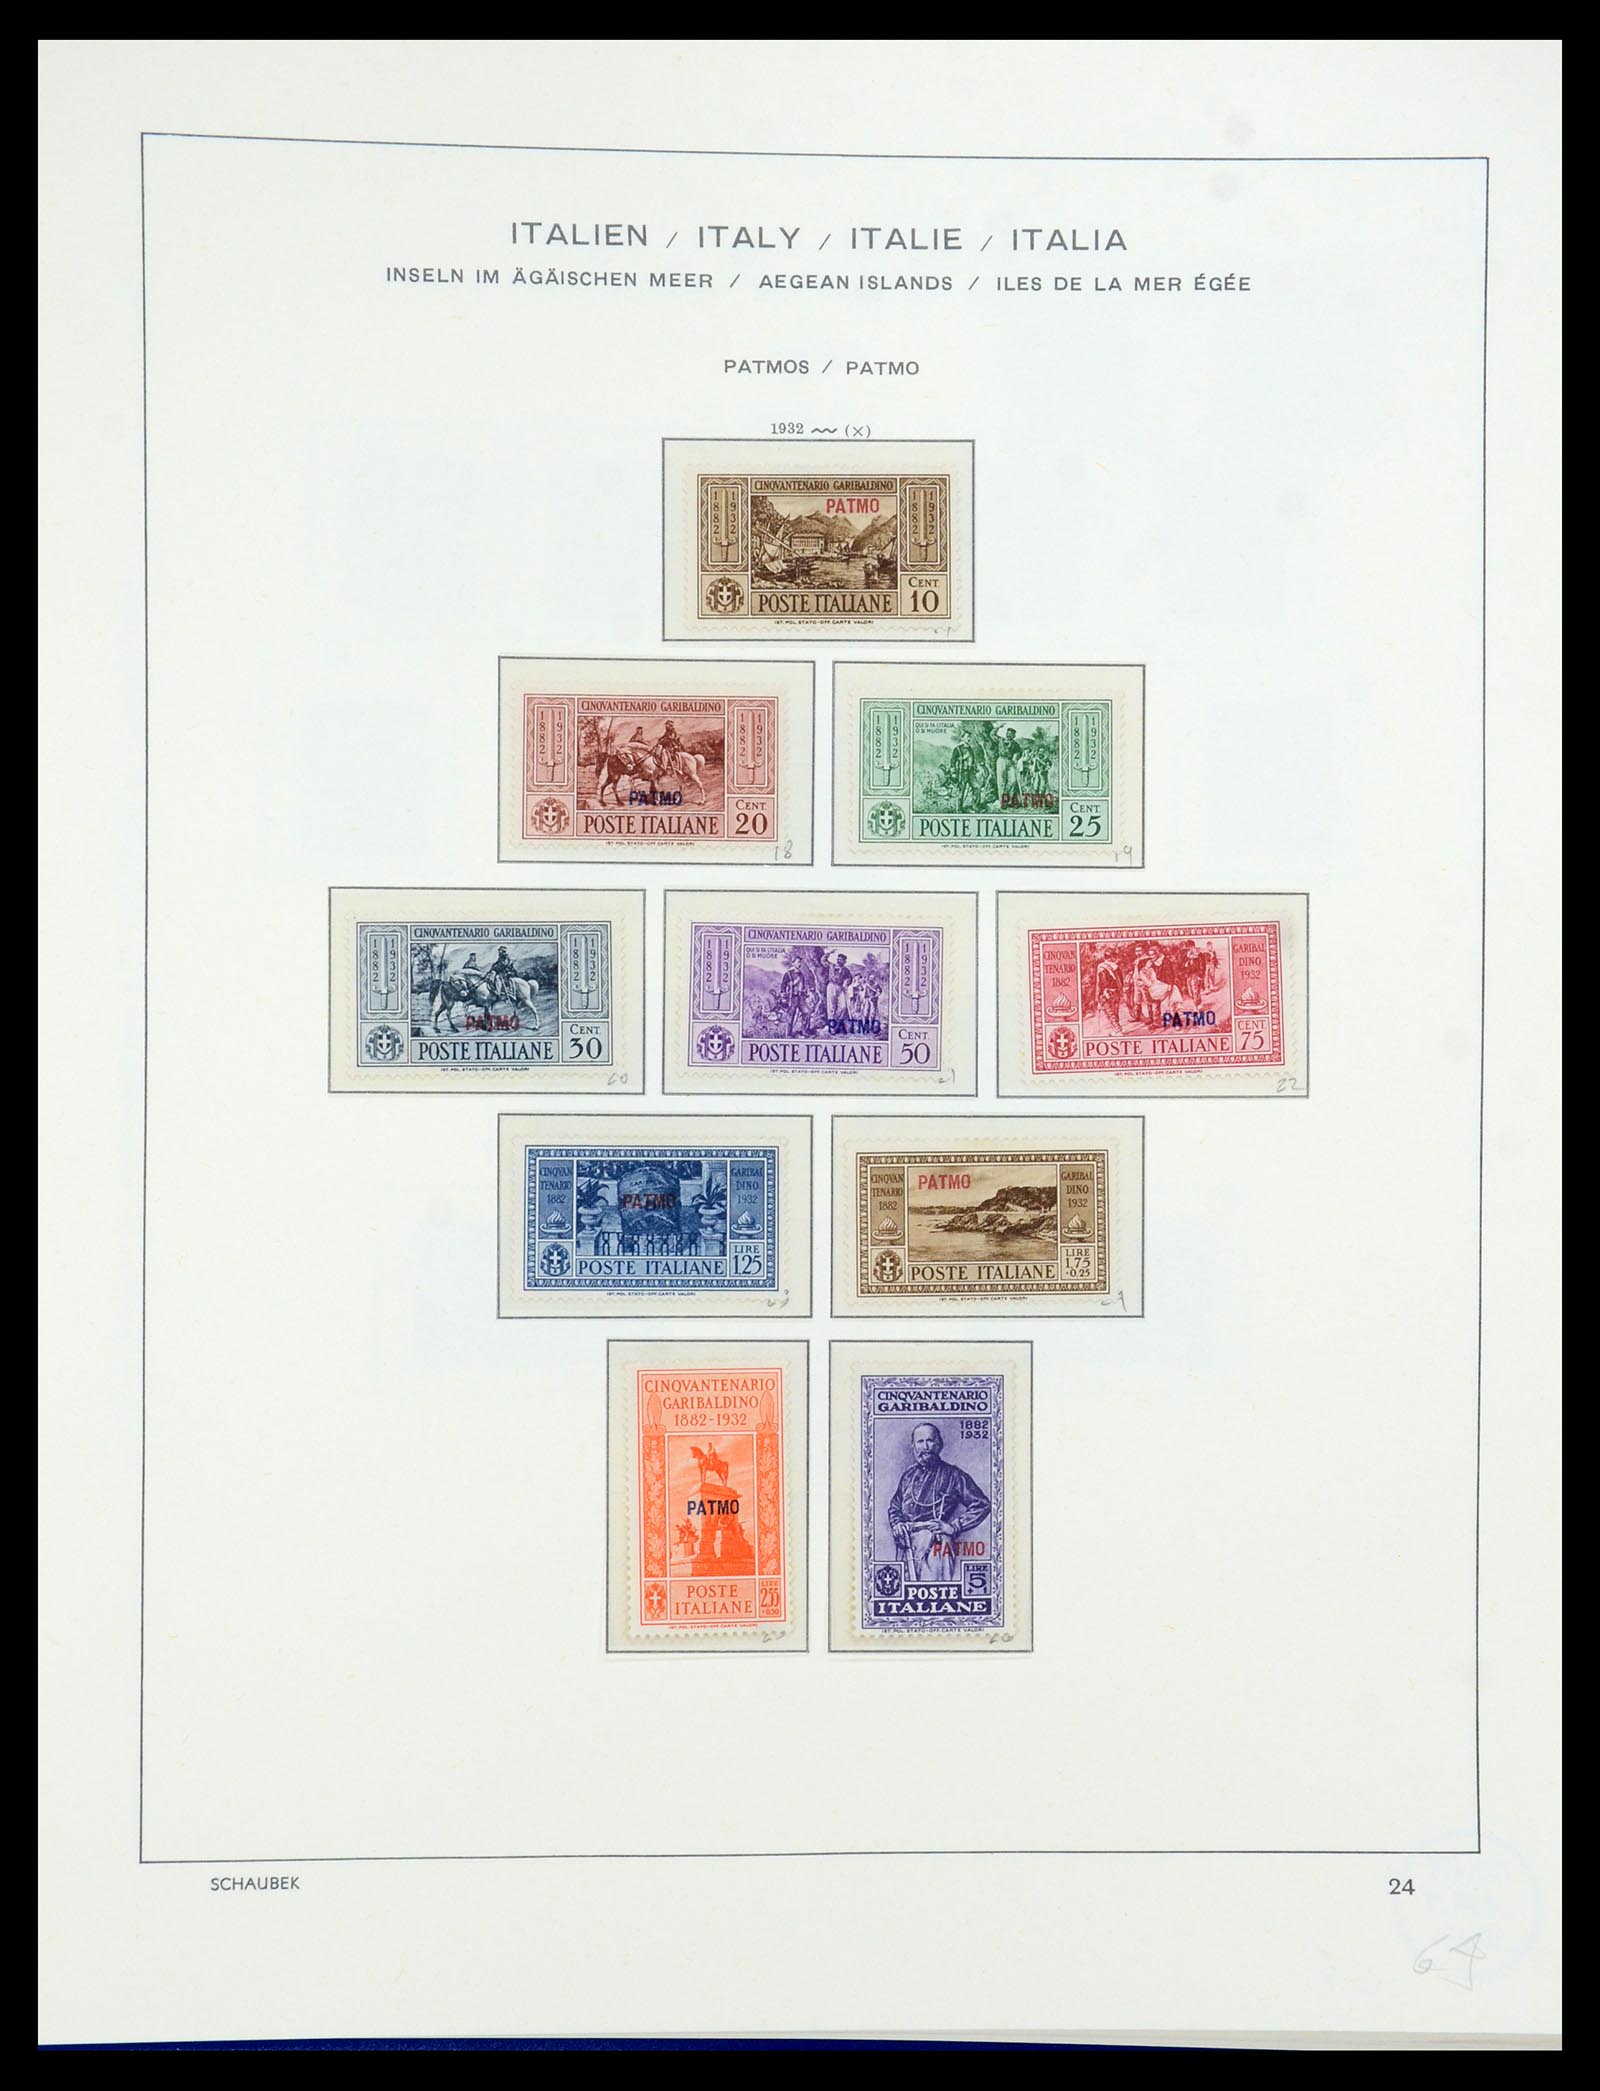 36181 030 - Stamp collection 36181 Italian Aegean Islands 1912-1941.